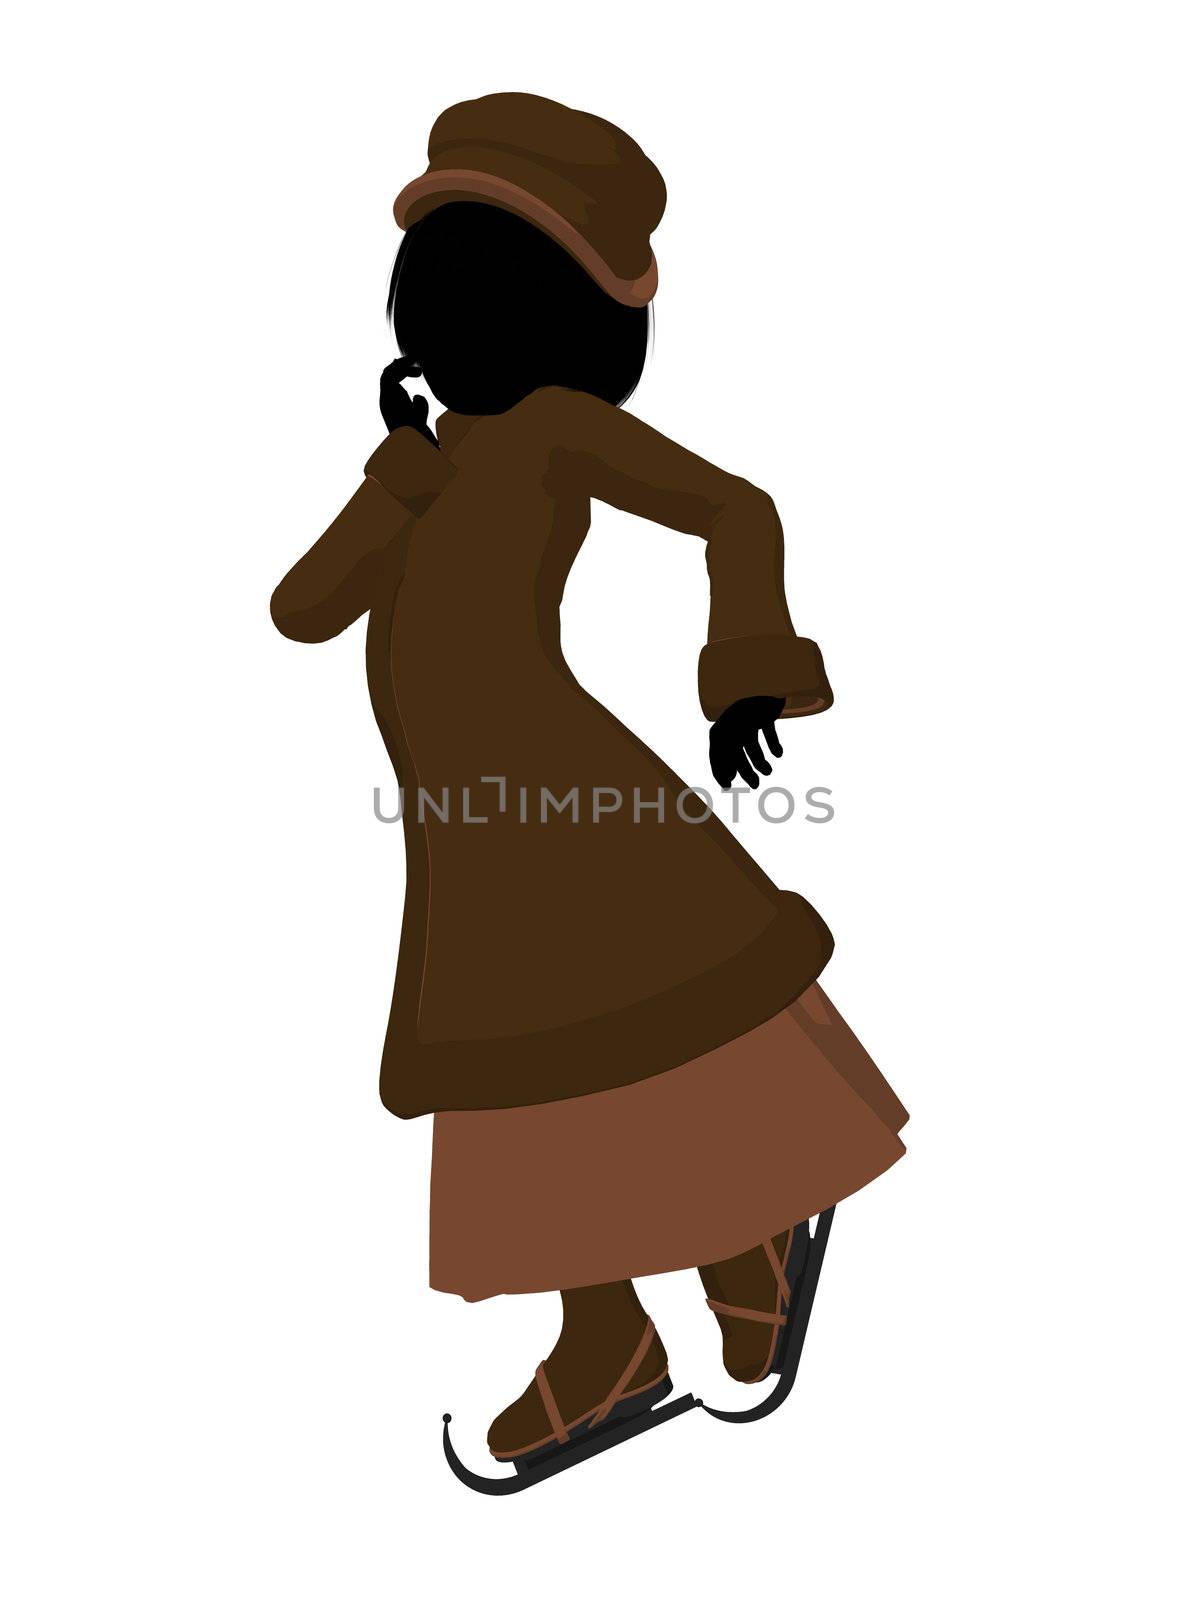 Victorian Girl Ice Skating Illustration Silhouette by kathygold